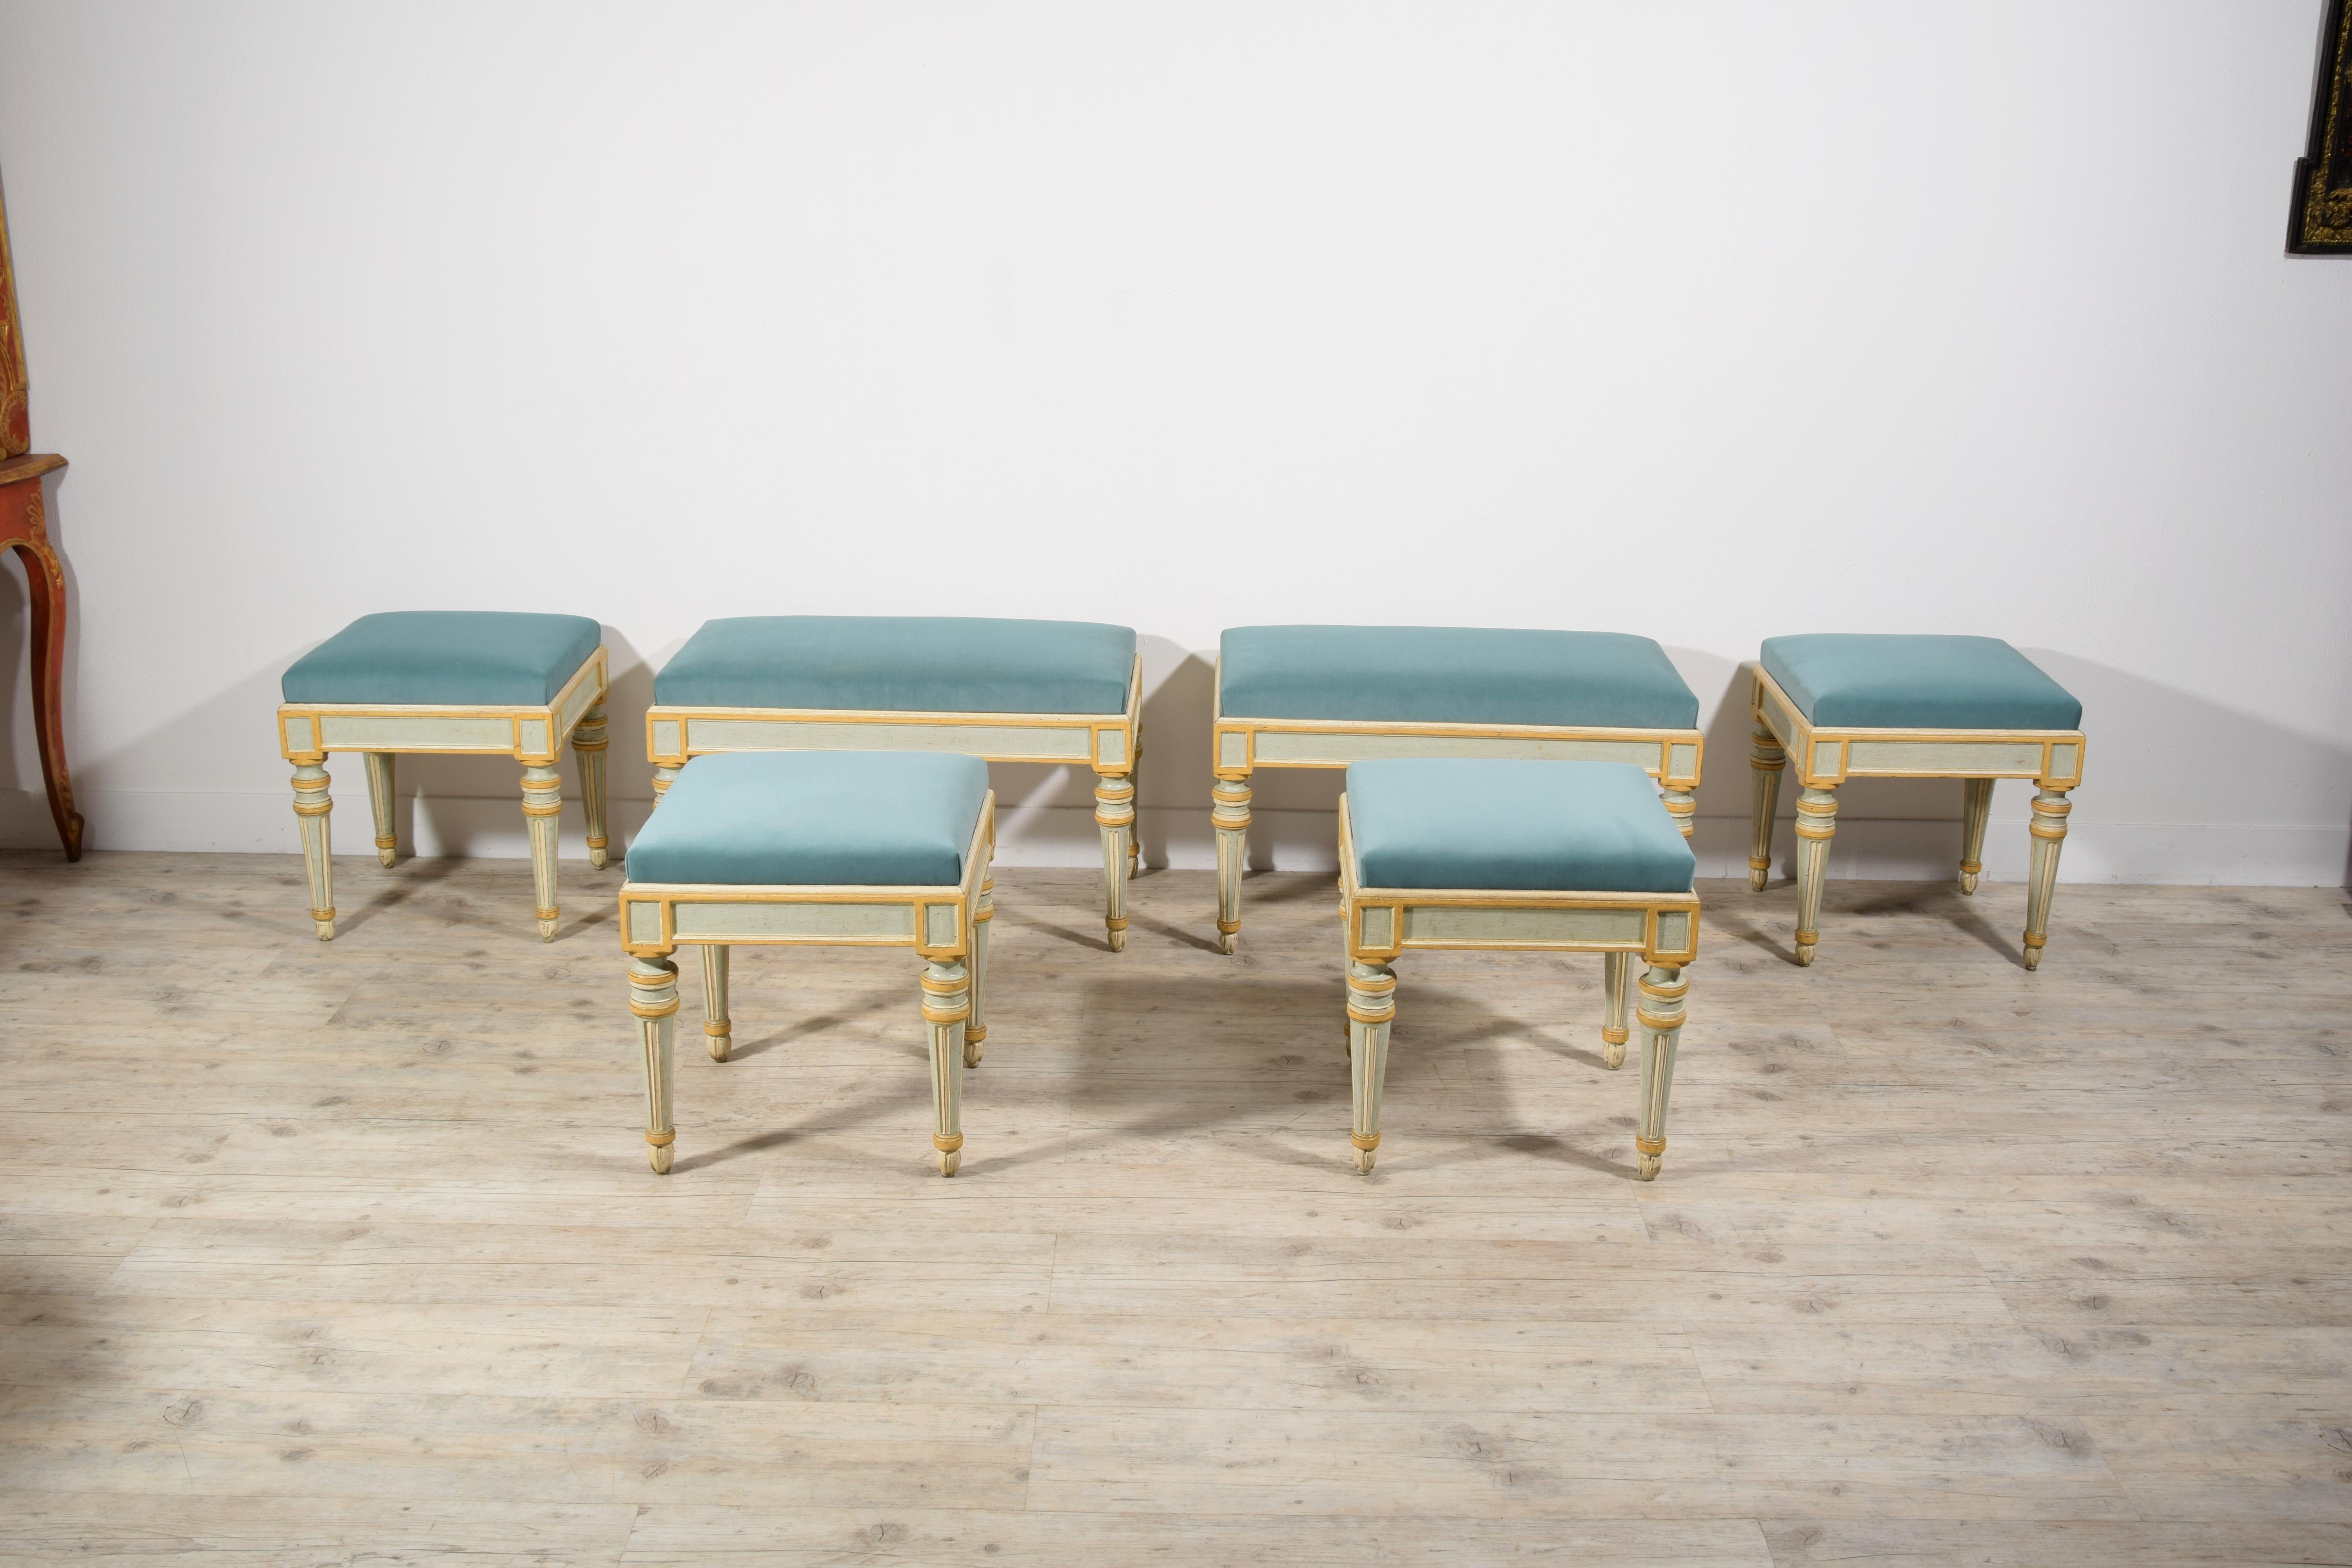 19th Century, Six Italian Neoclassical Lacquered Wood Benches  For Sale 15